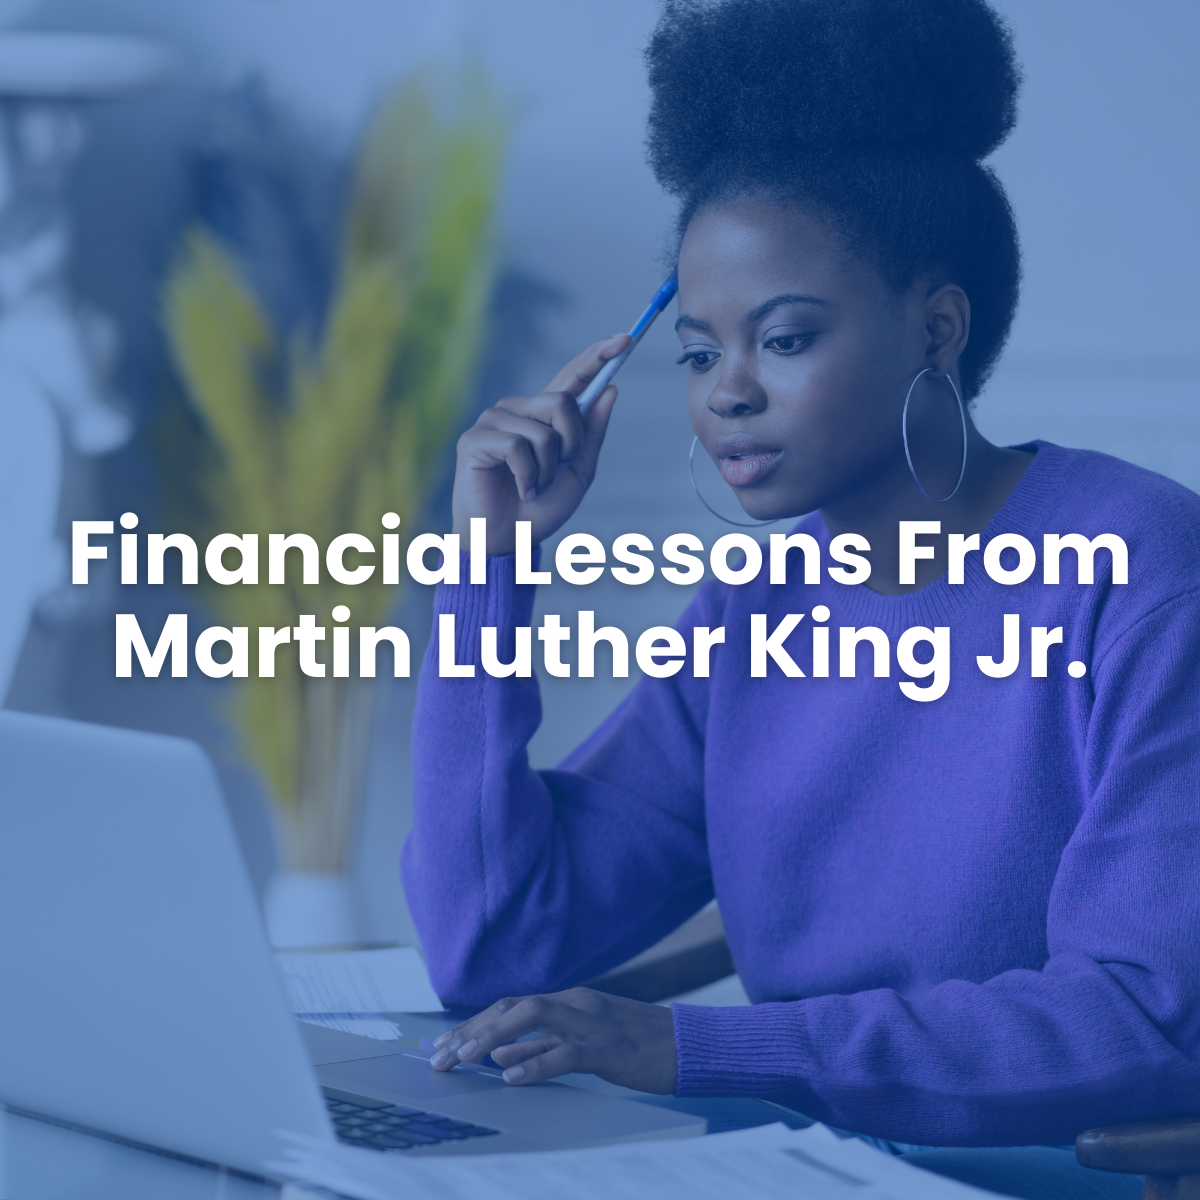 Four Financial Lessons To Learn From Dr. Martin Luther King, Jr.